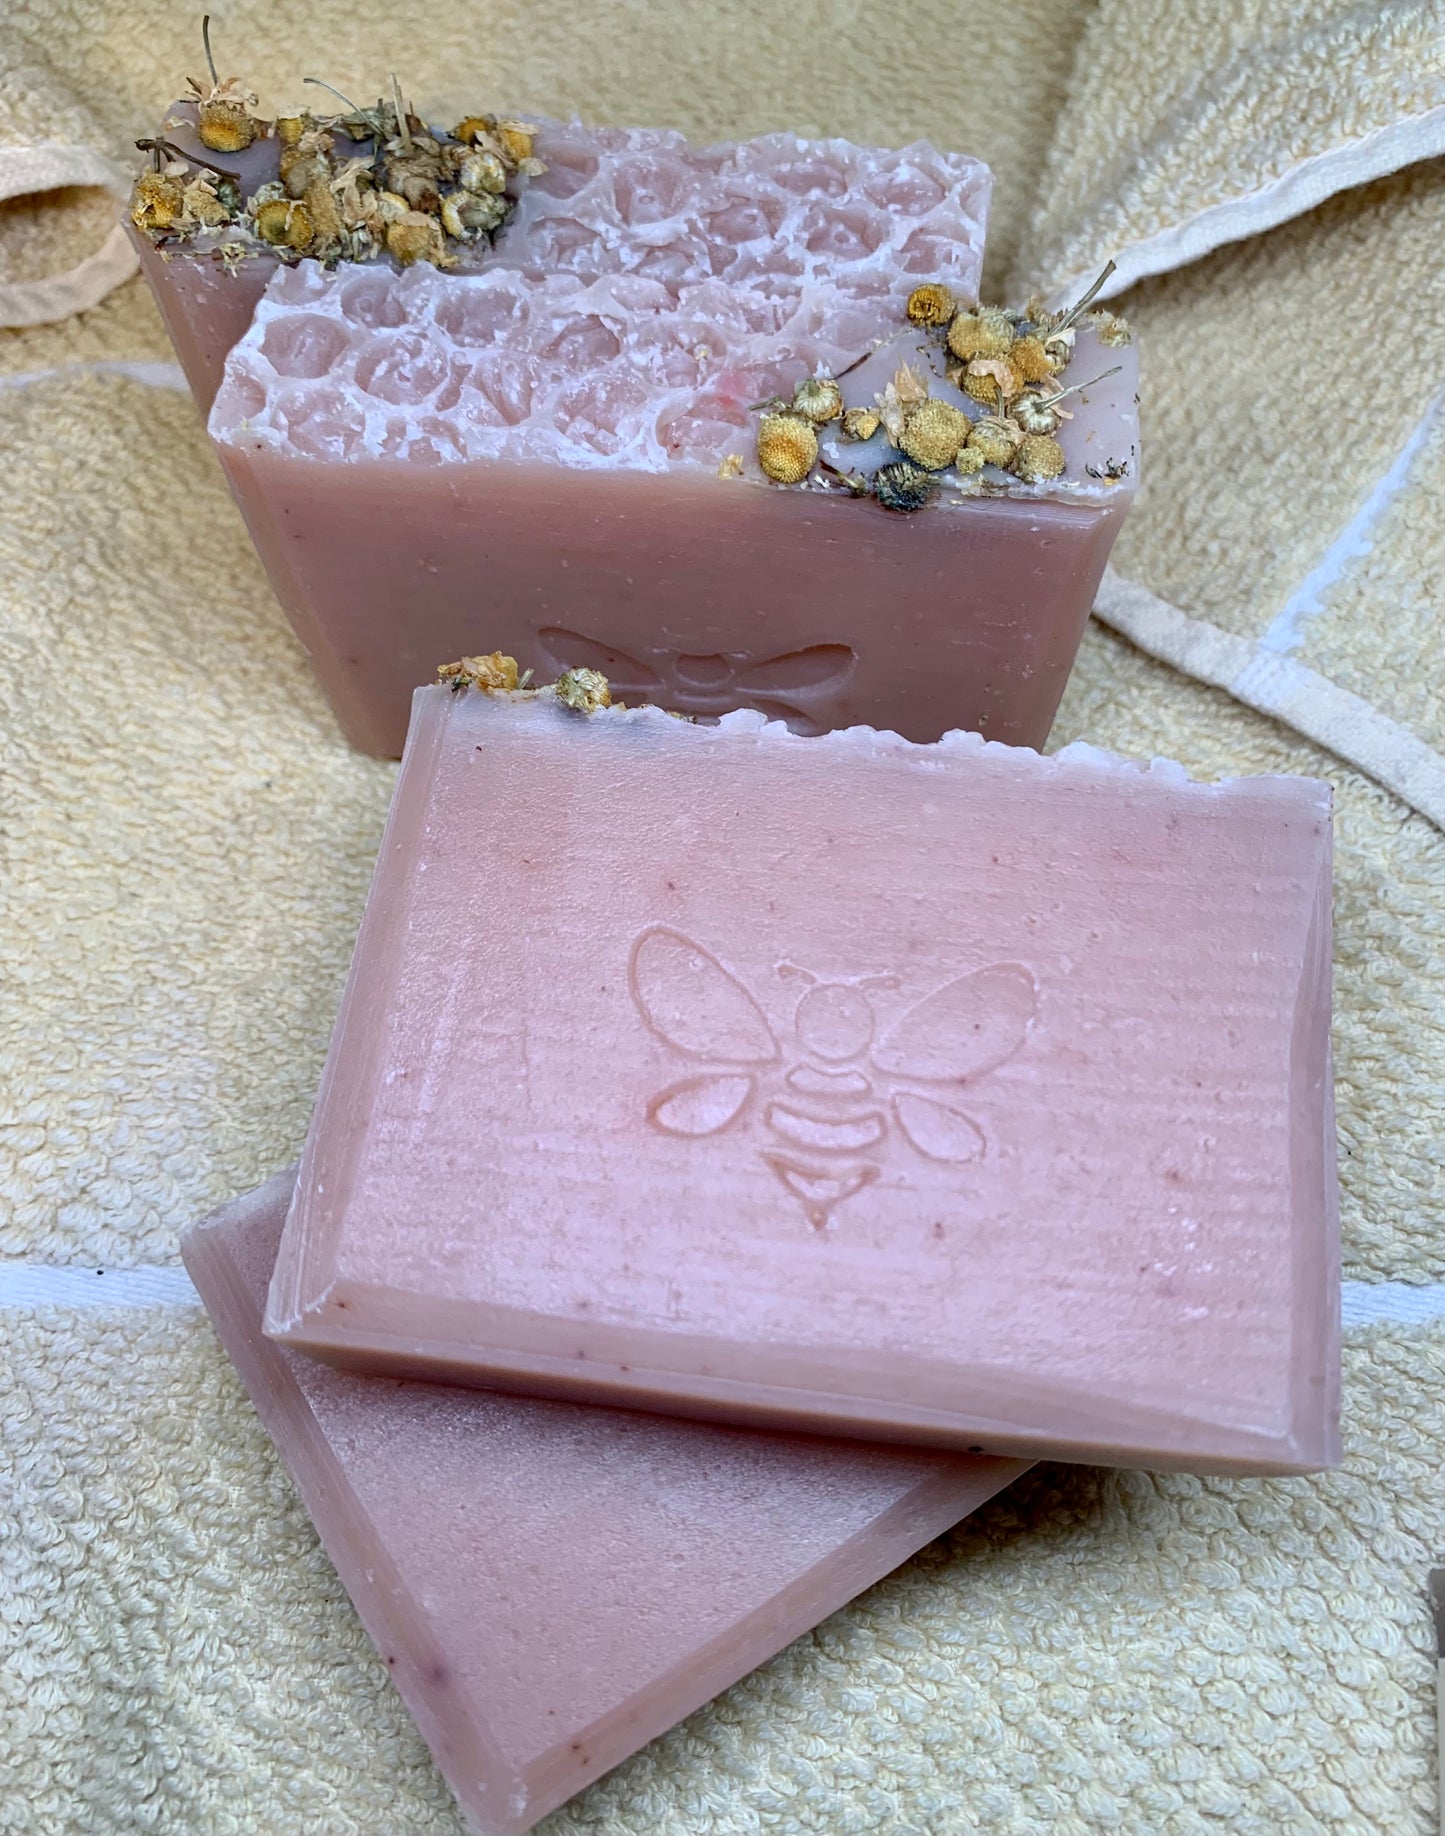 Raw Honey Soap with Madder Root (Fragrance Free)